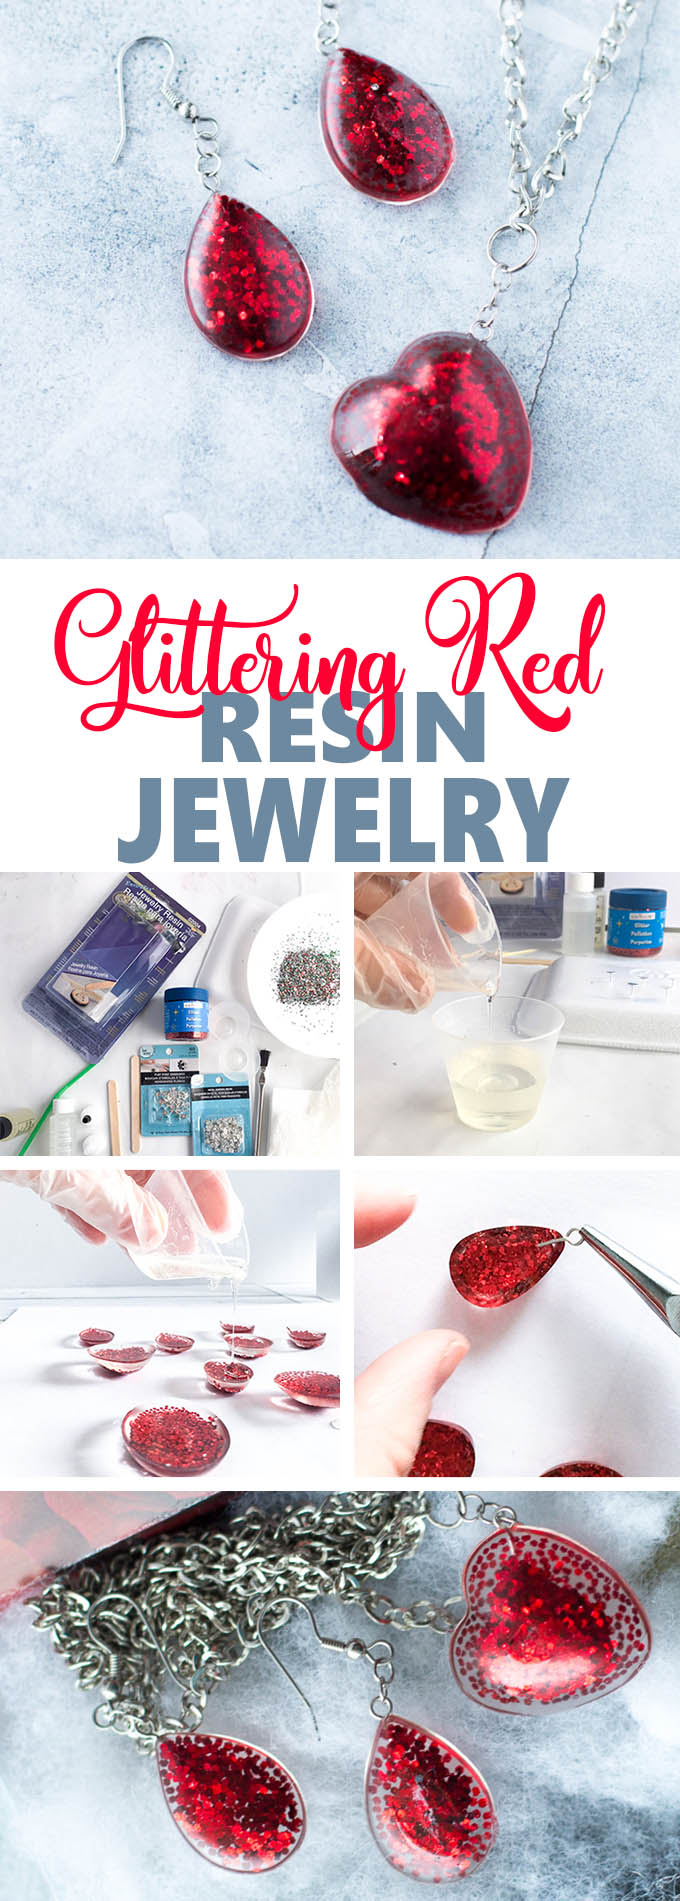 Galentine's Day DIY gift idea | Valentine's day jewelry idea with resin #resincrafts #resincraftsblog 